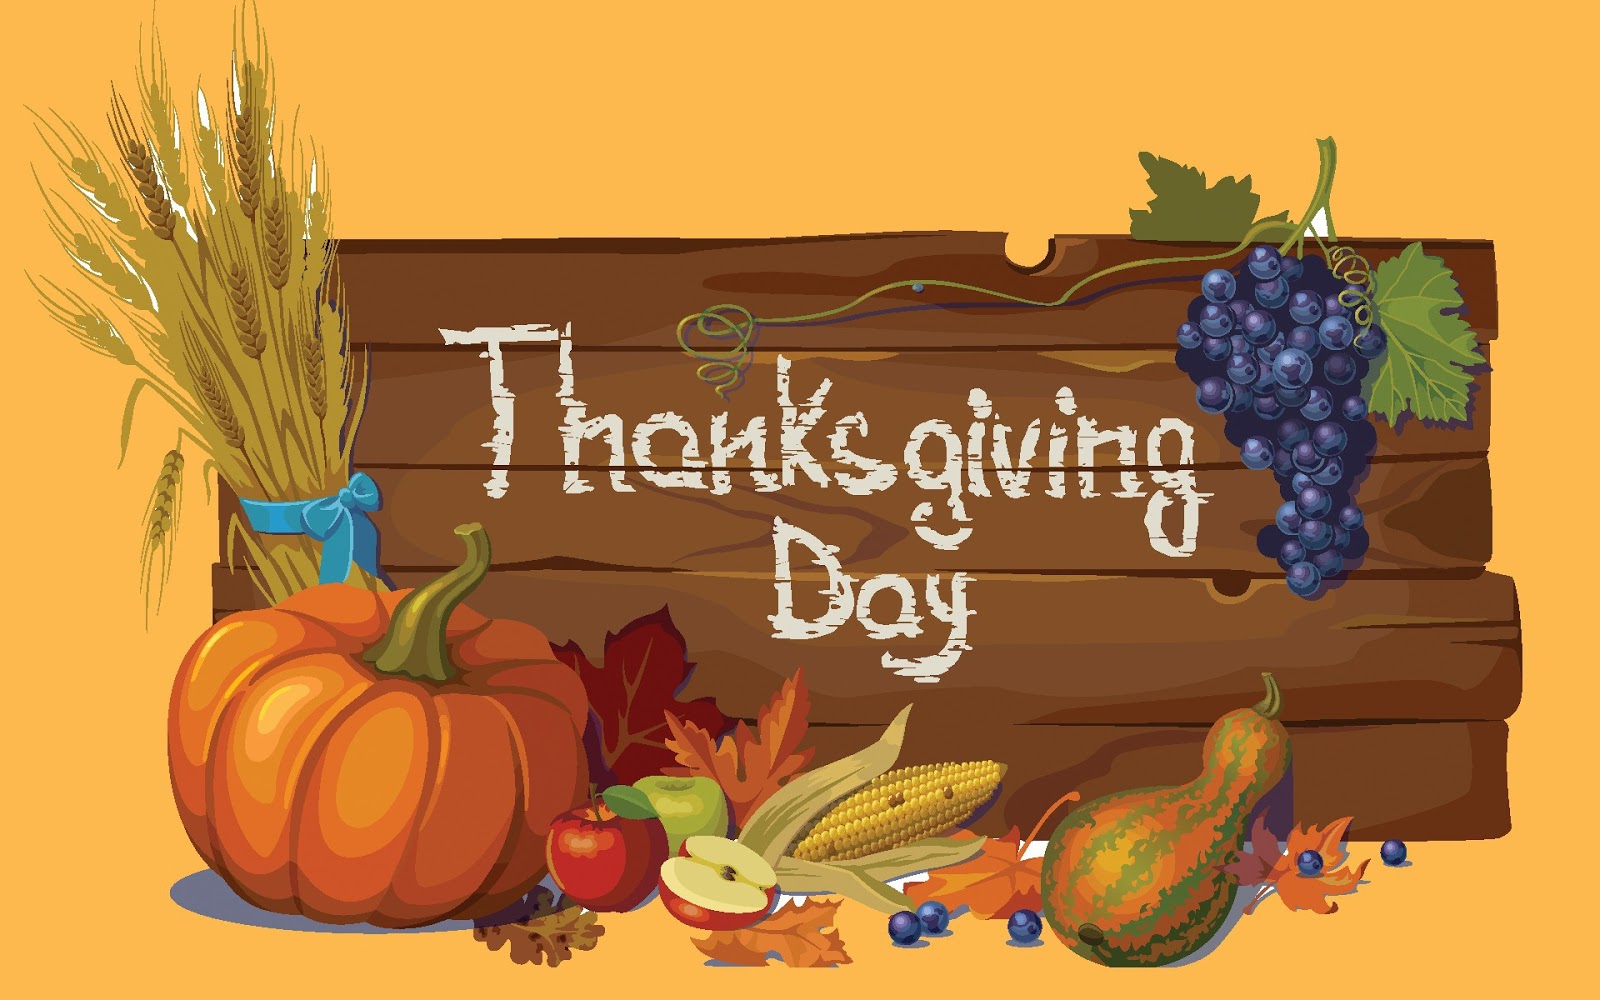 13 Happy Thanksgiving Day 2016 Image Wallpaper For